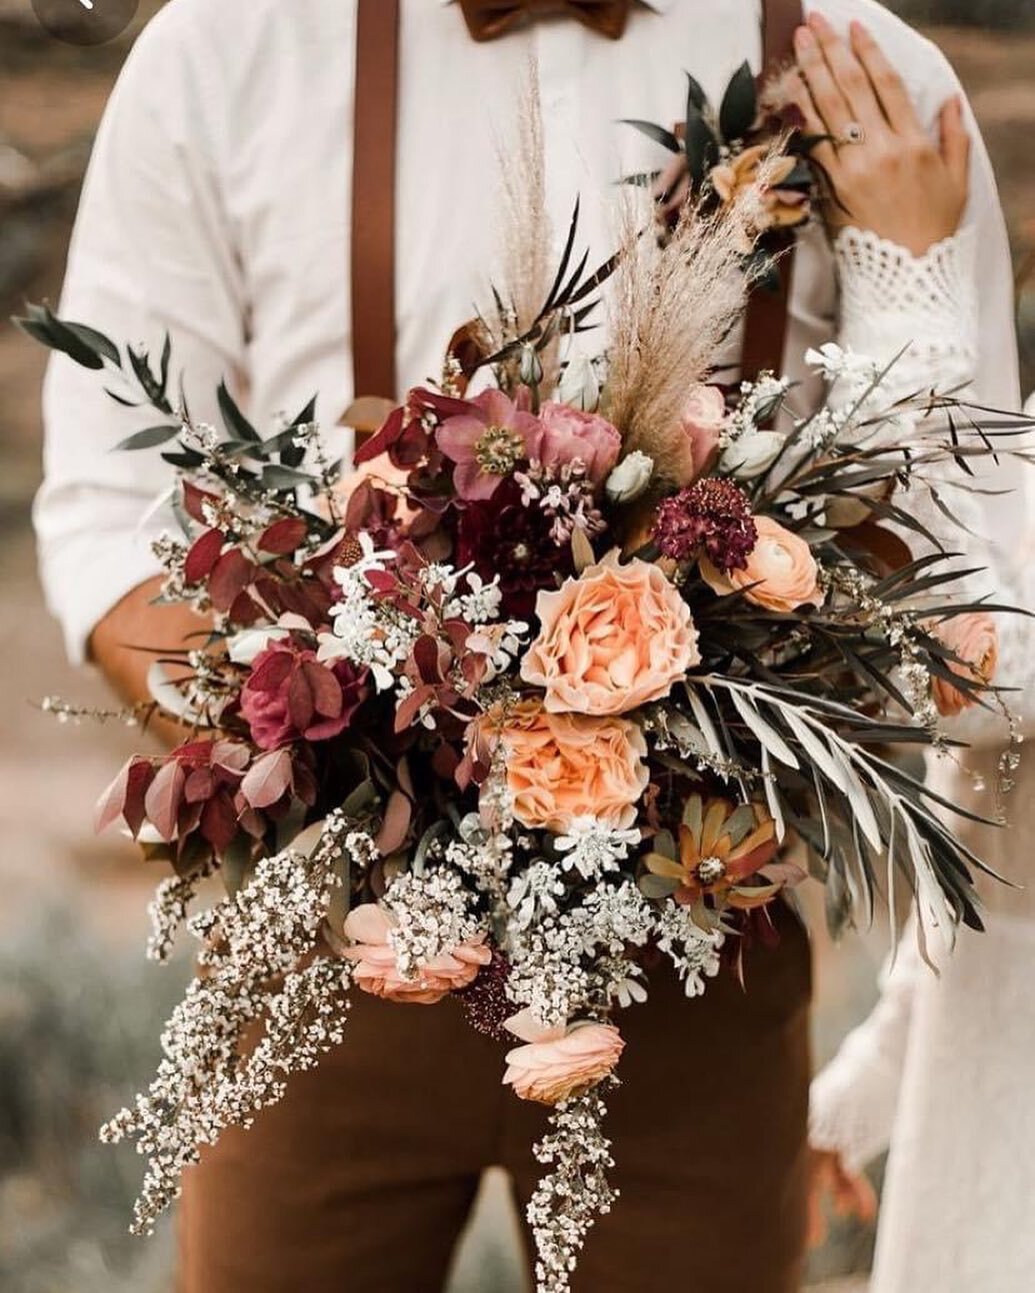 A little past fall inspiration that I had to put in display 🍂

#chicagowedding #ChicagoWeddings #chicagoweddingplanner #chicagoweddingphotography #chicagoweddingvenue #chicagoweddingvendors #chicagoweddingflorist #ChicagoWeddingAndEventPlanner #chic